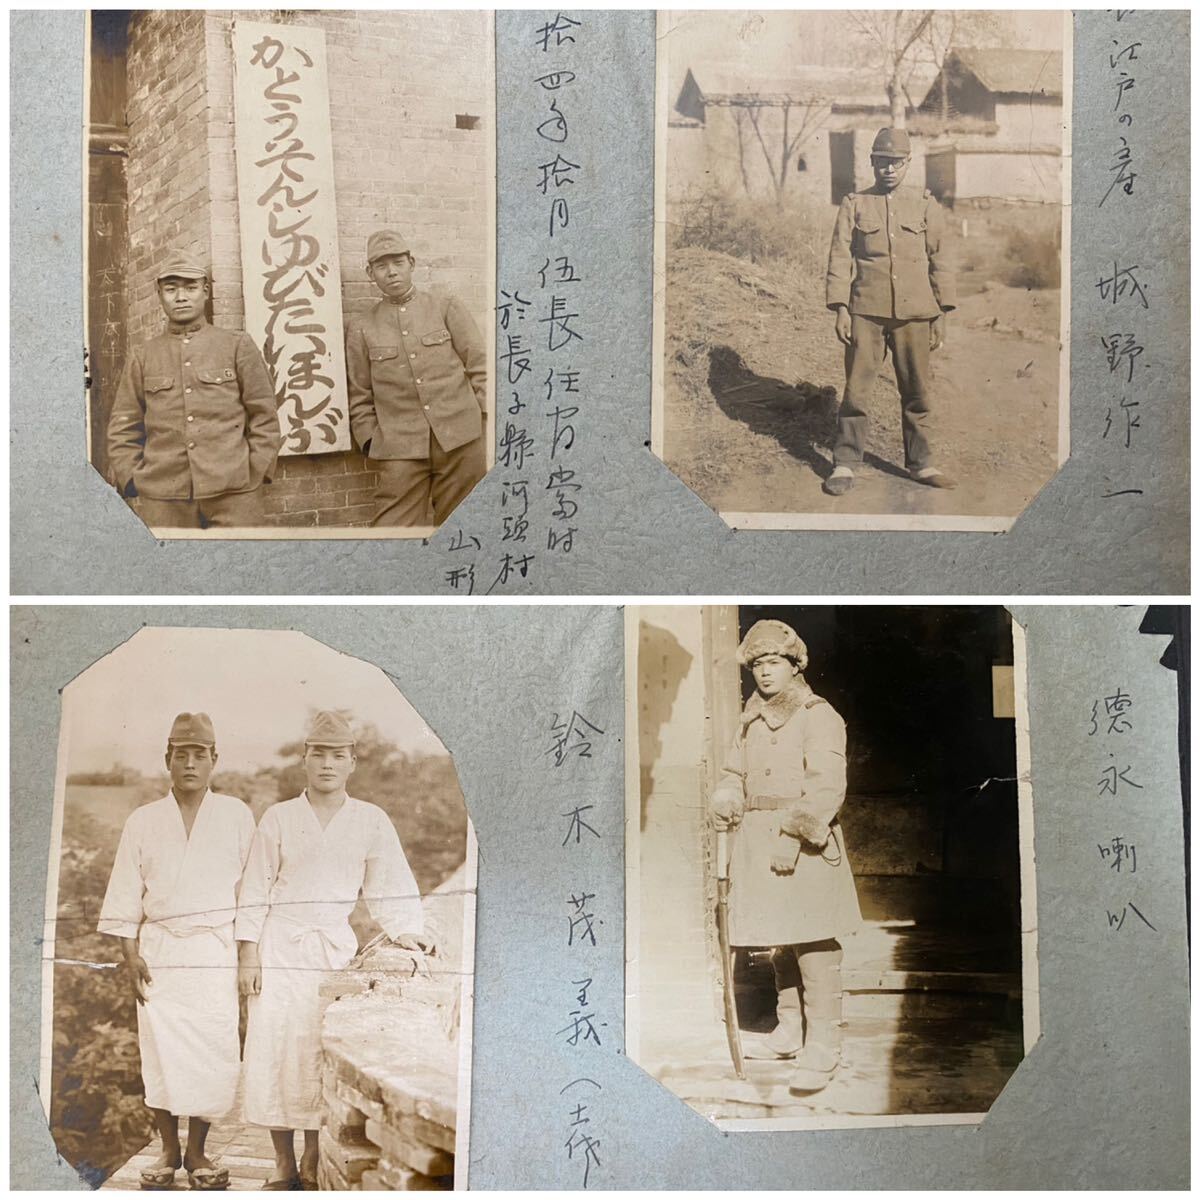 .. no. 80 ream . large Japan . country land army old Japan army cheap . river head . album photograph war front that time thing history materials approximately 70 sheets 